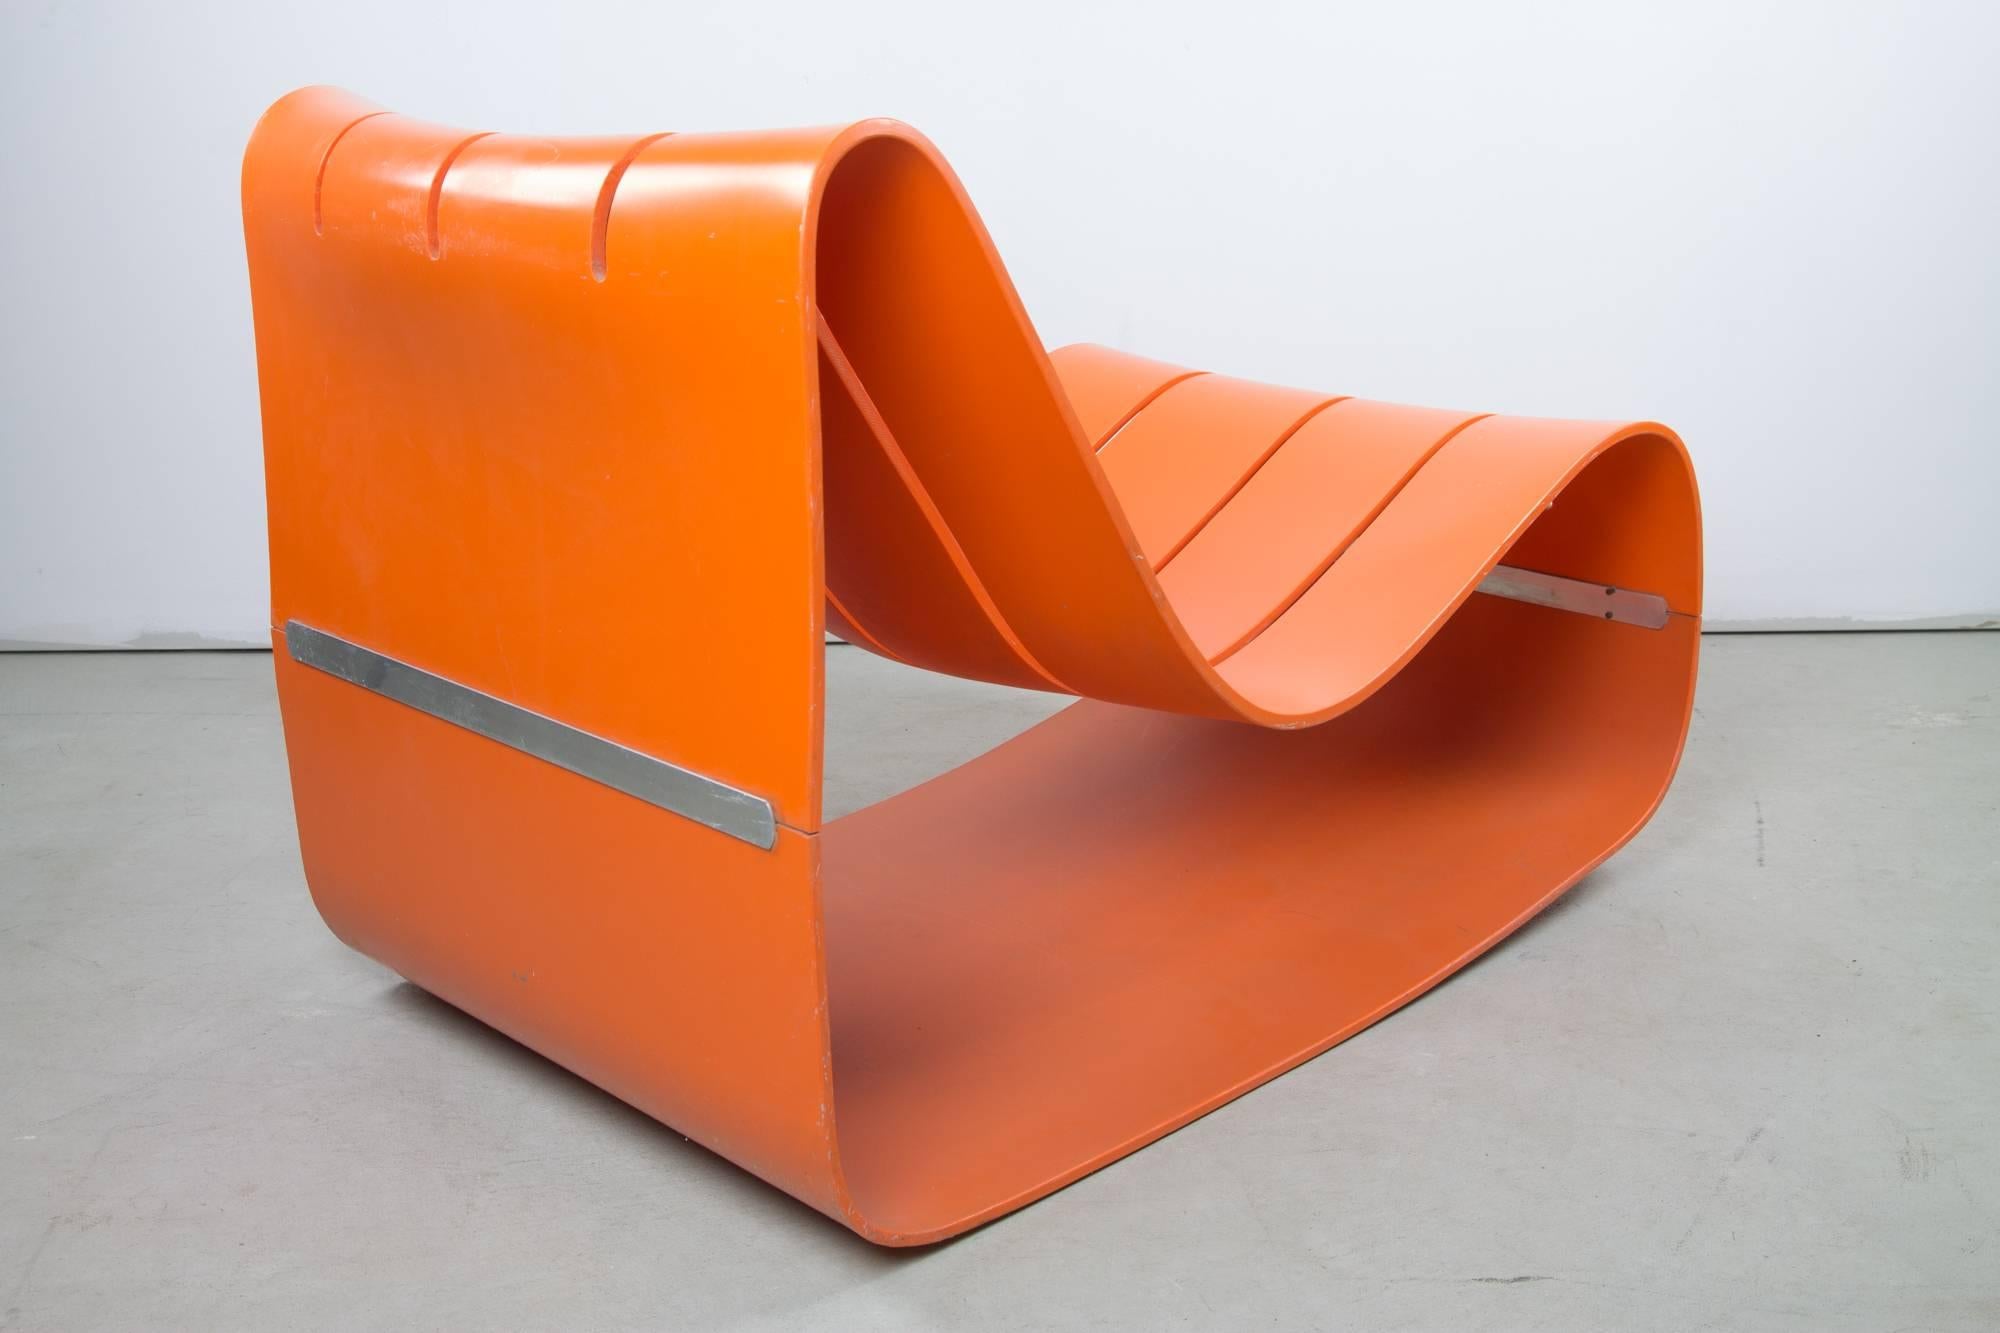 This very scarce chair by Motomi Kawakami for Alberto Bazzani is formed of two shells of orange ABS plastic, joined across their width at the lower back and front by a double metal bar screwed through from the inside of the shell. This forms a